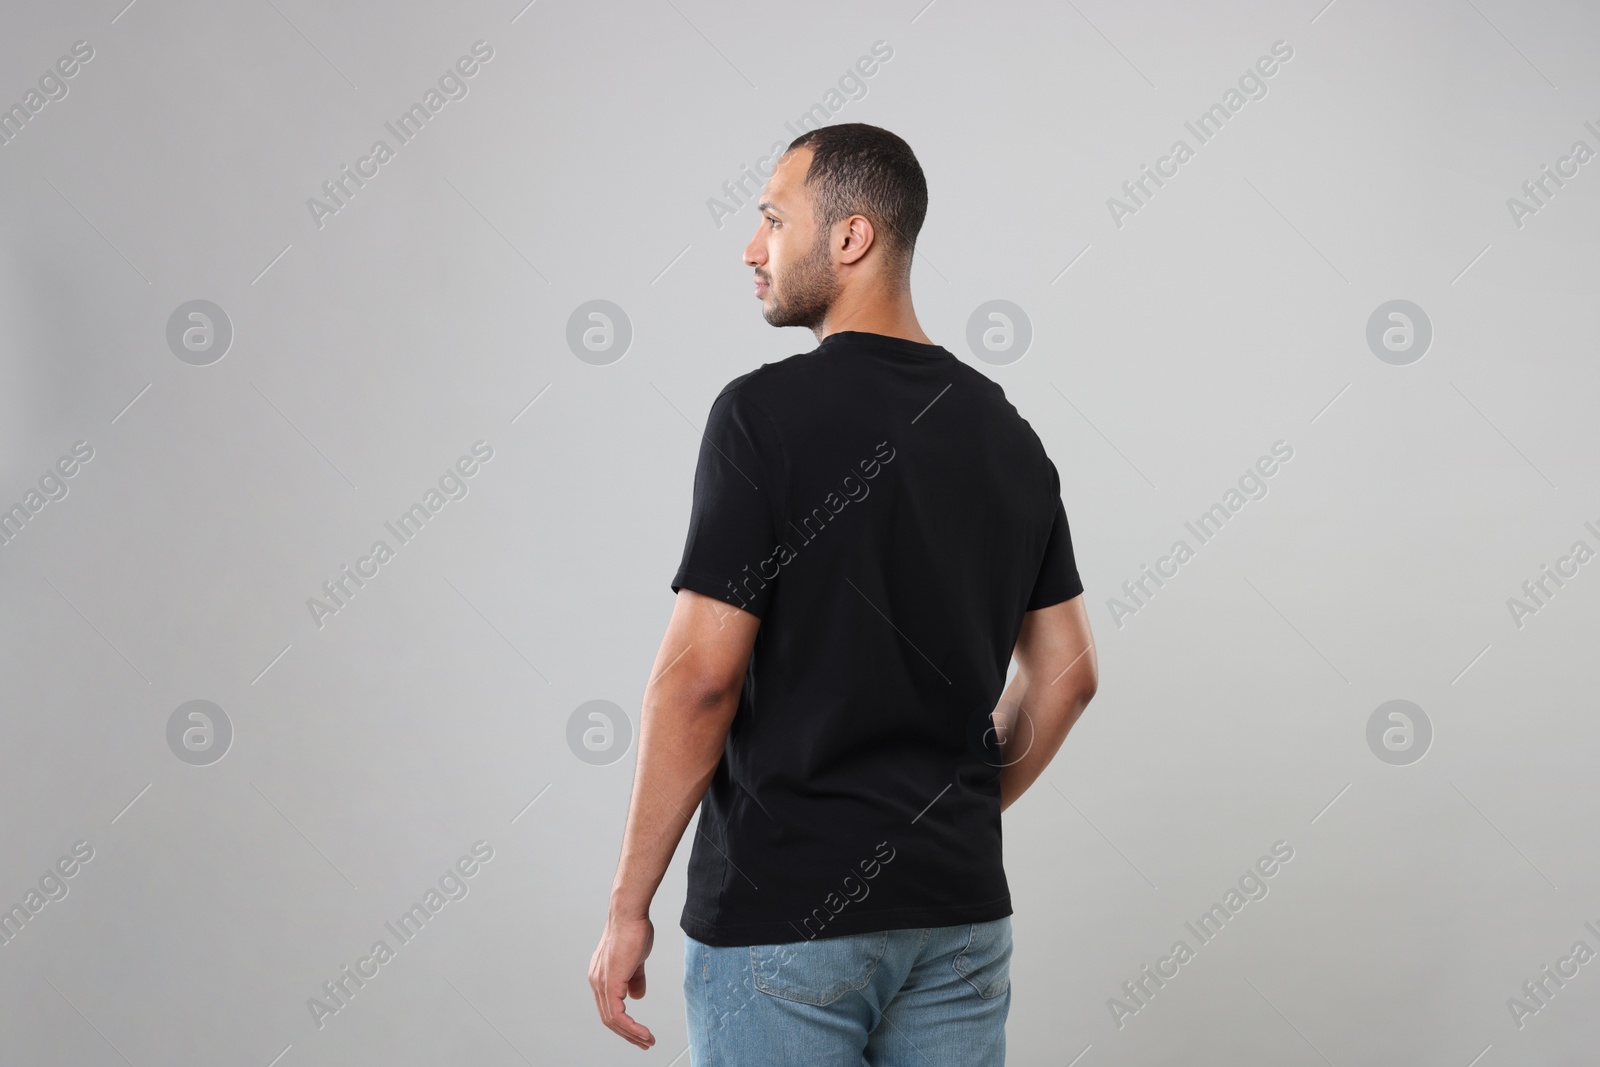 Photo of Man wearing black t-shirt on gray background, back view